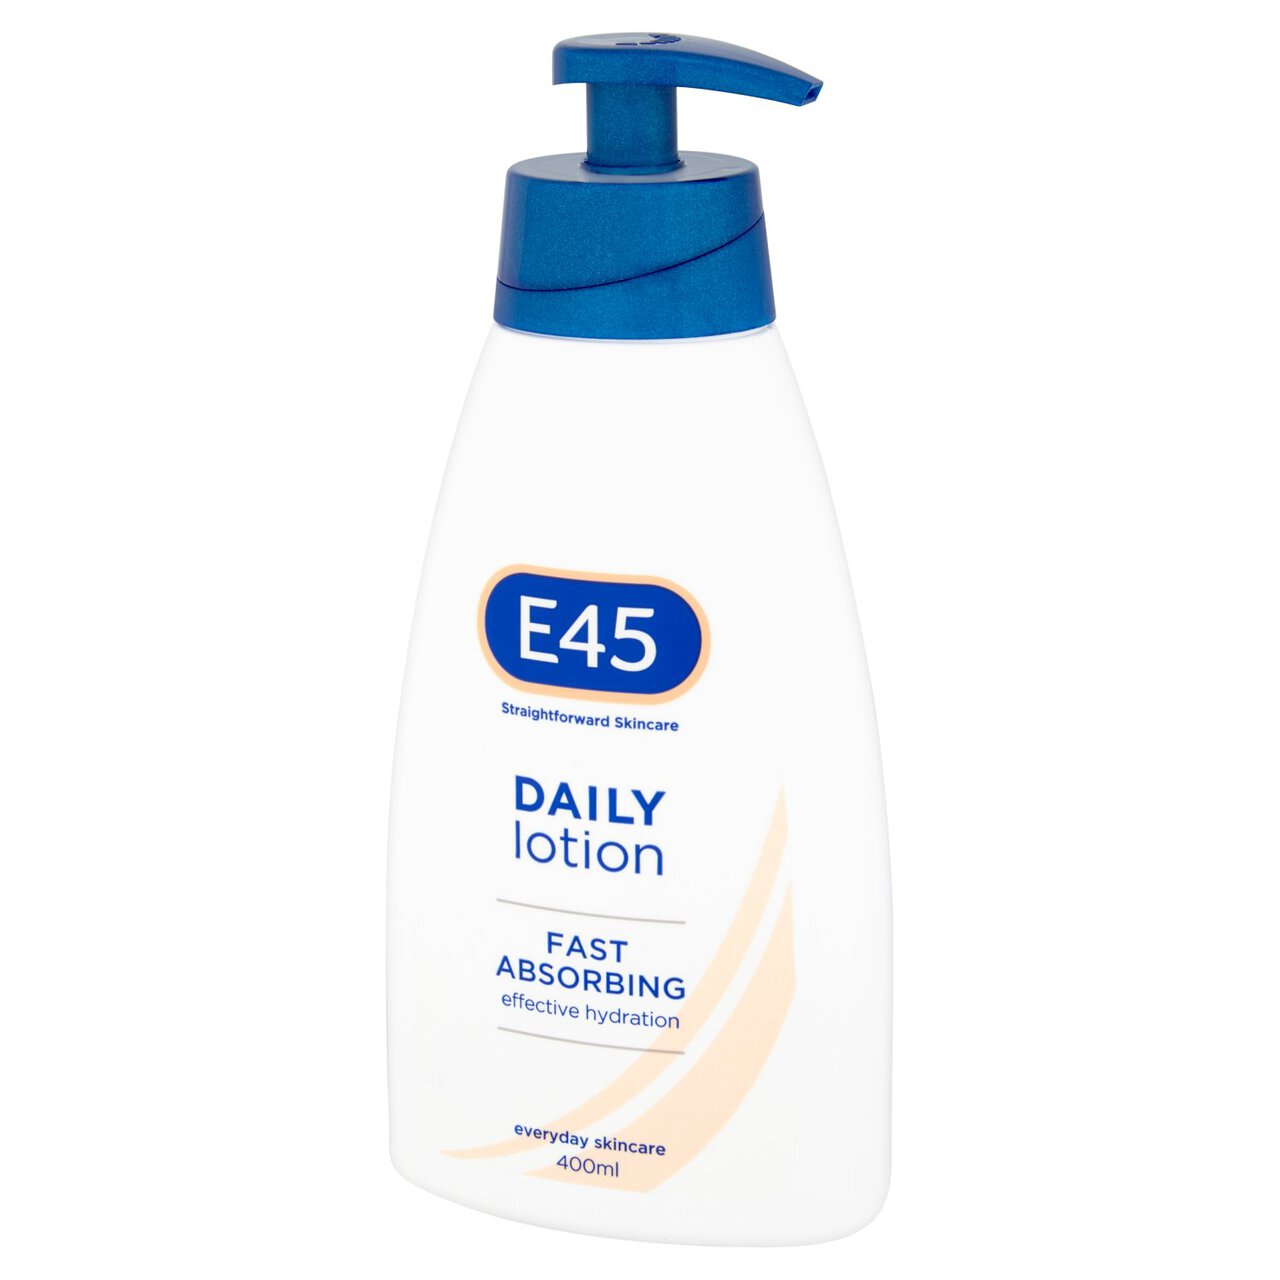 E45 Daily Lotion for very dry skin Pump 400ml